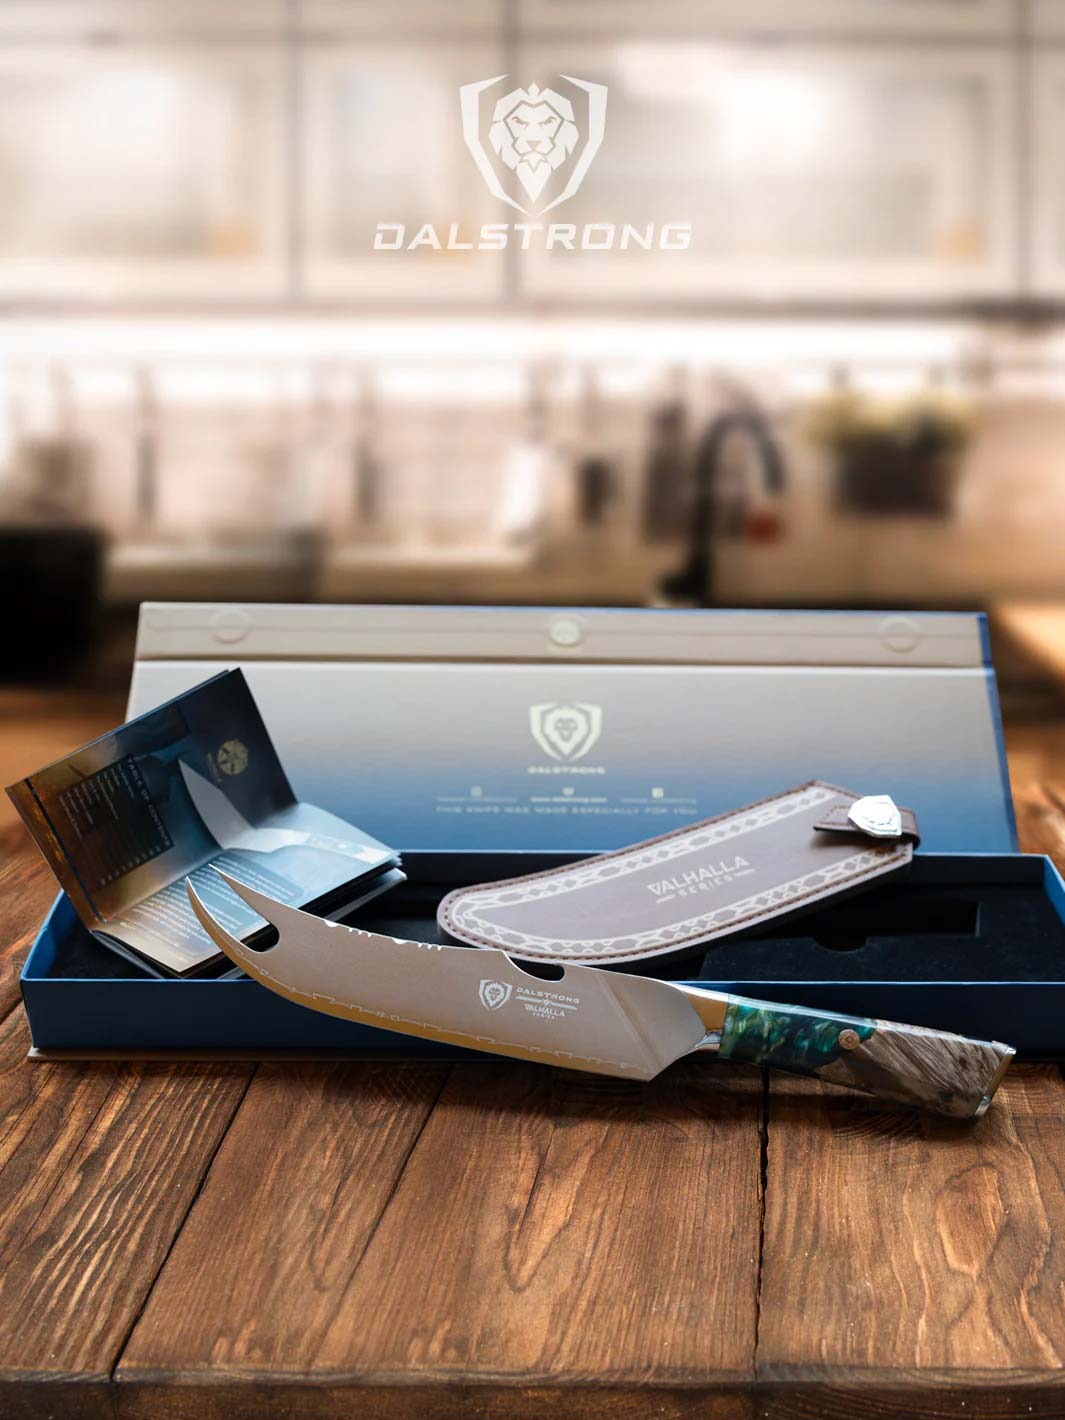 Dalstrong valhalla series 8 inch pitmaster knife with wooden handle and sheath outside it's premium packaging.